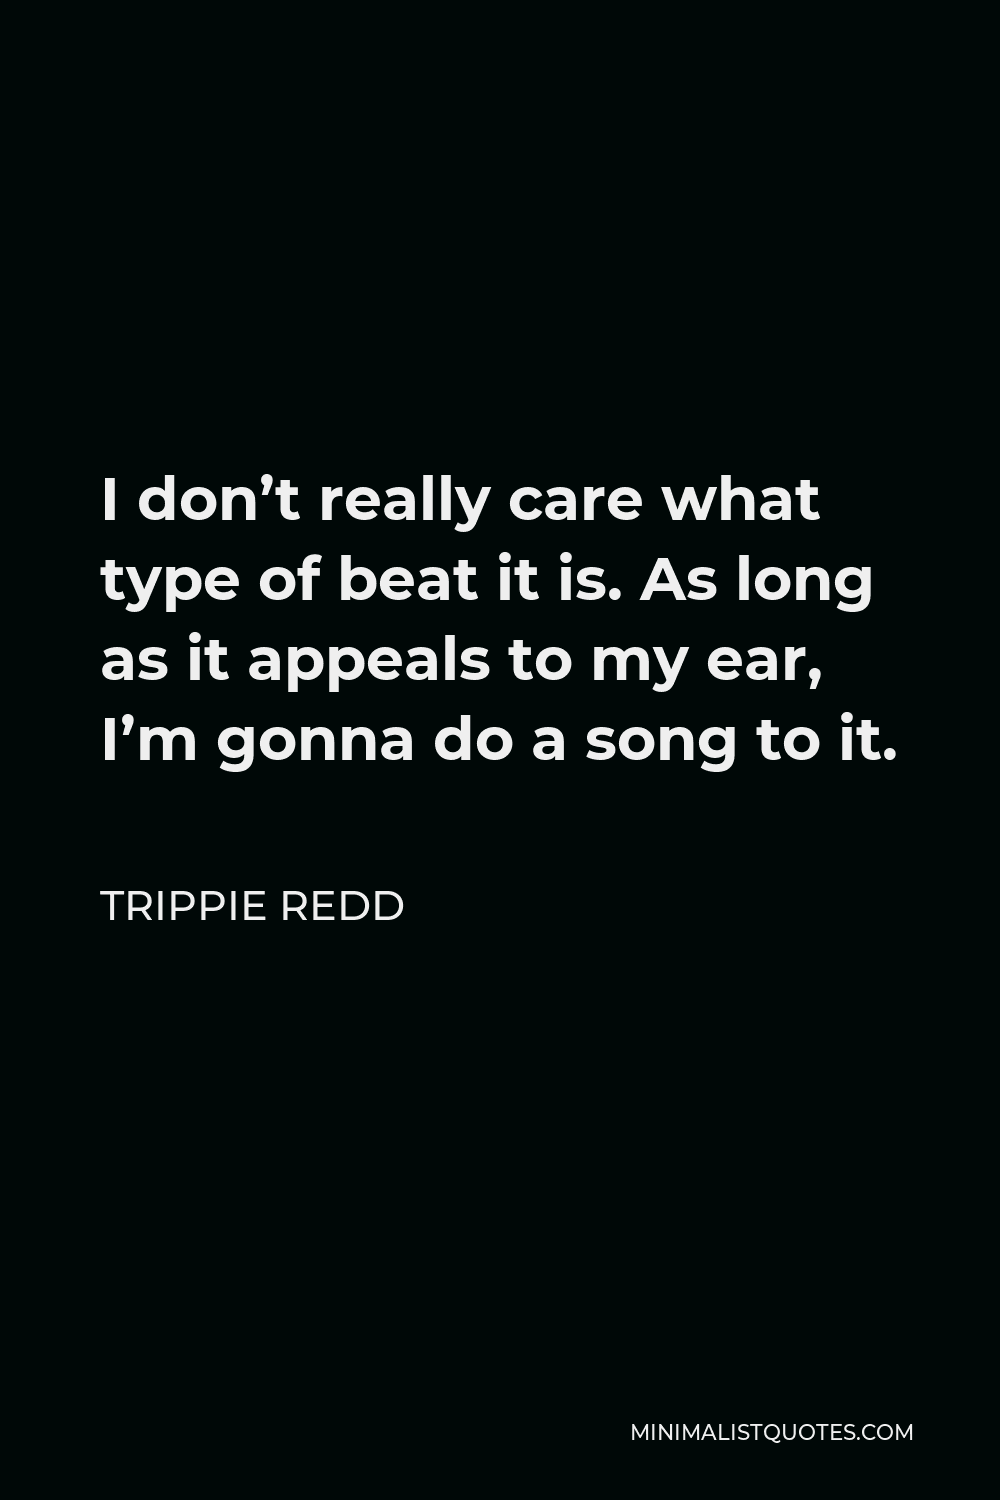 Trippie Redd Quote - I don’t really care what type of beat it is. As long as it appeals to my ear, I’m gonna do a song to it.